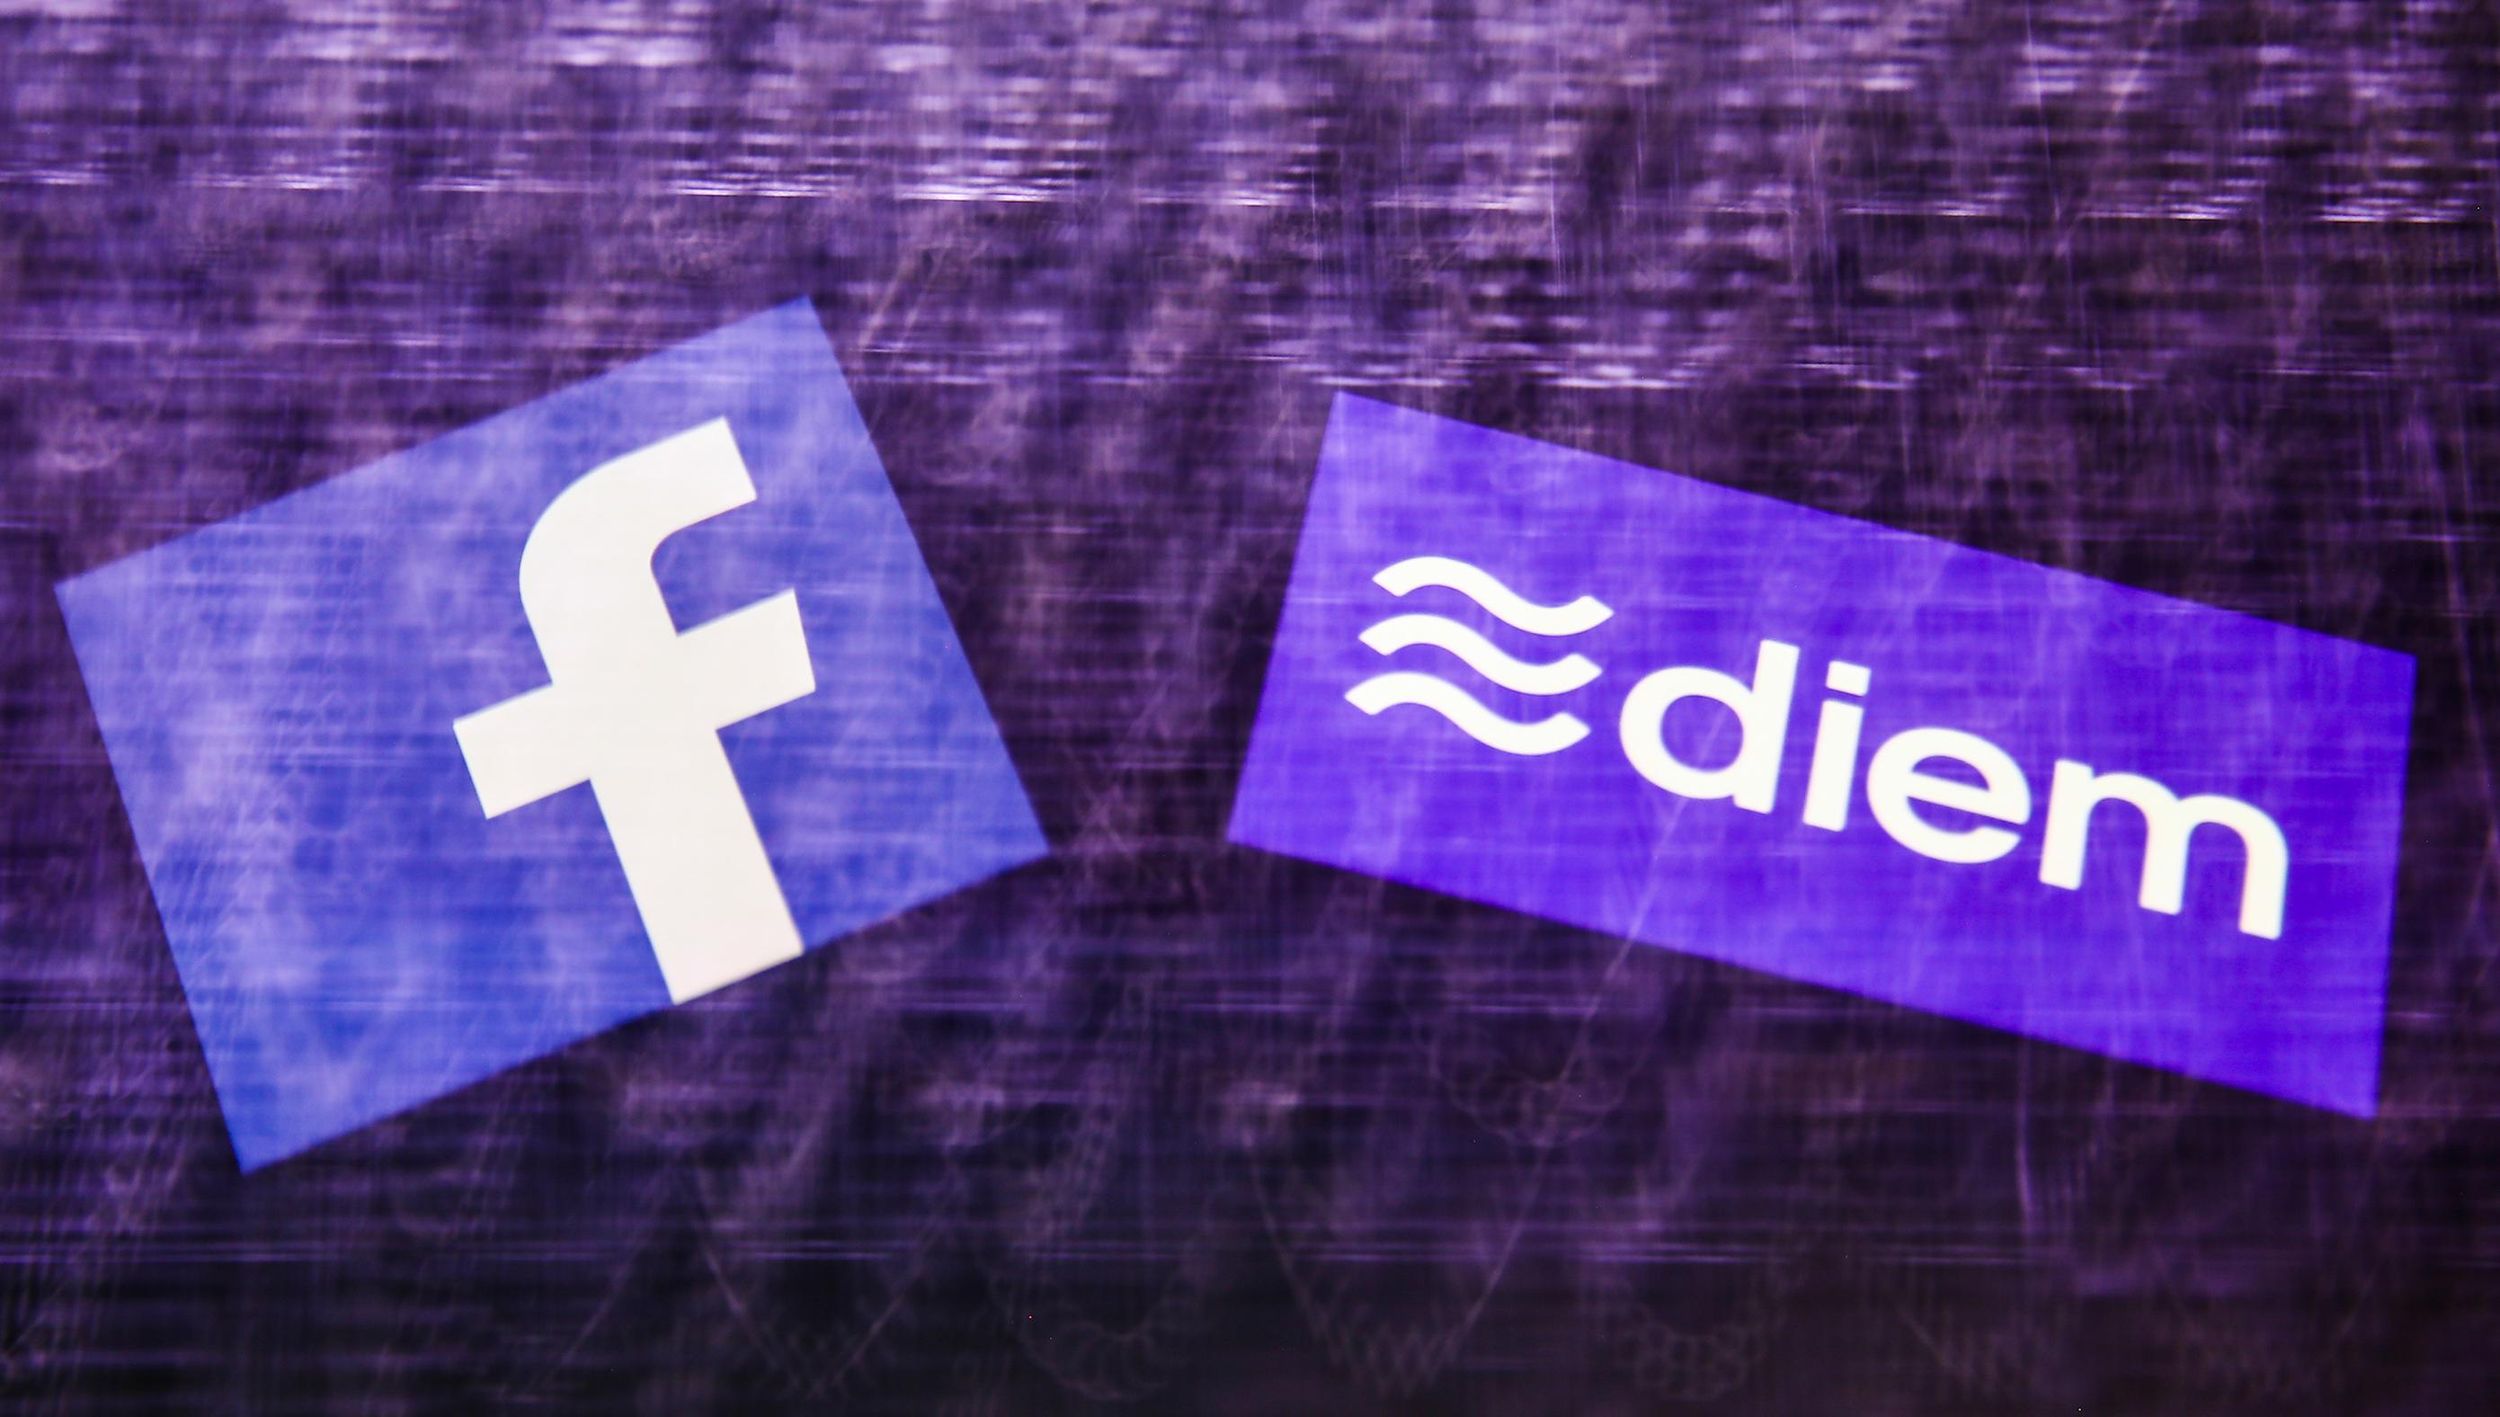 The background is purple and wavy. On the left is Facebooks icon logo. On the right is the icon for Diem.